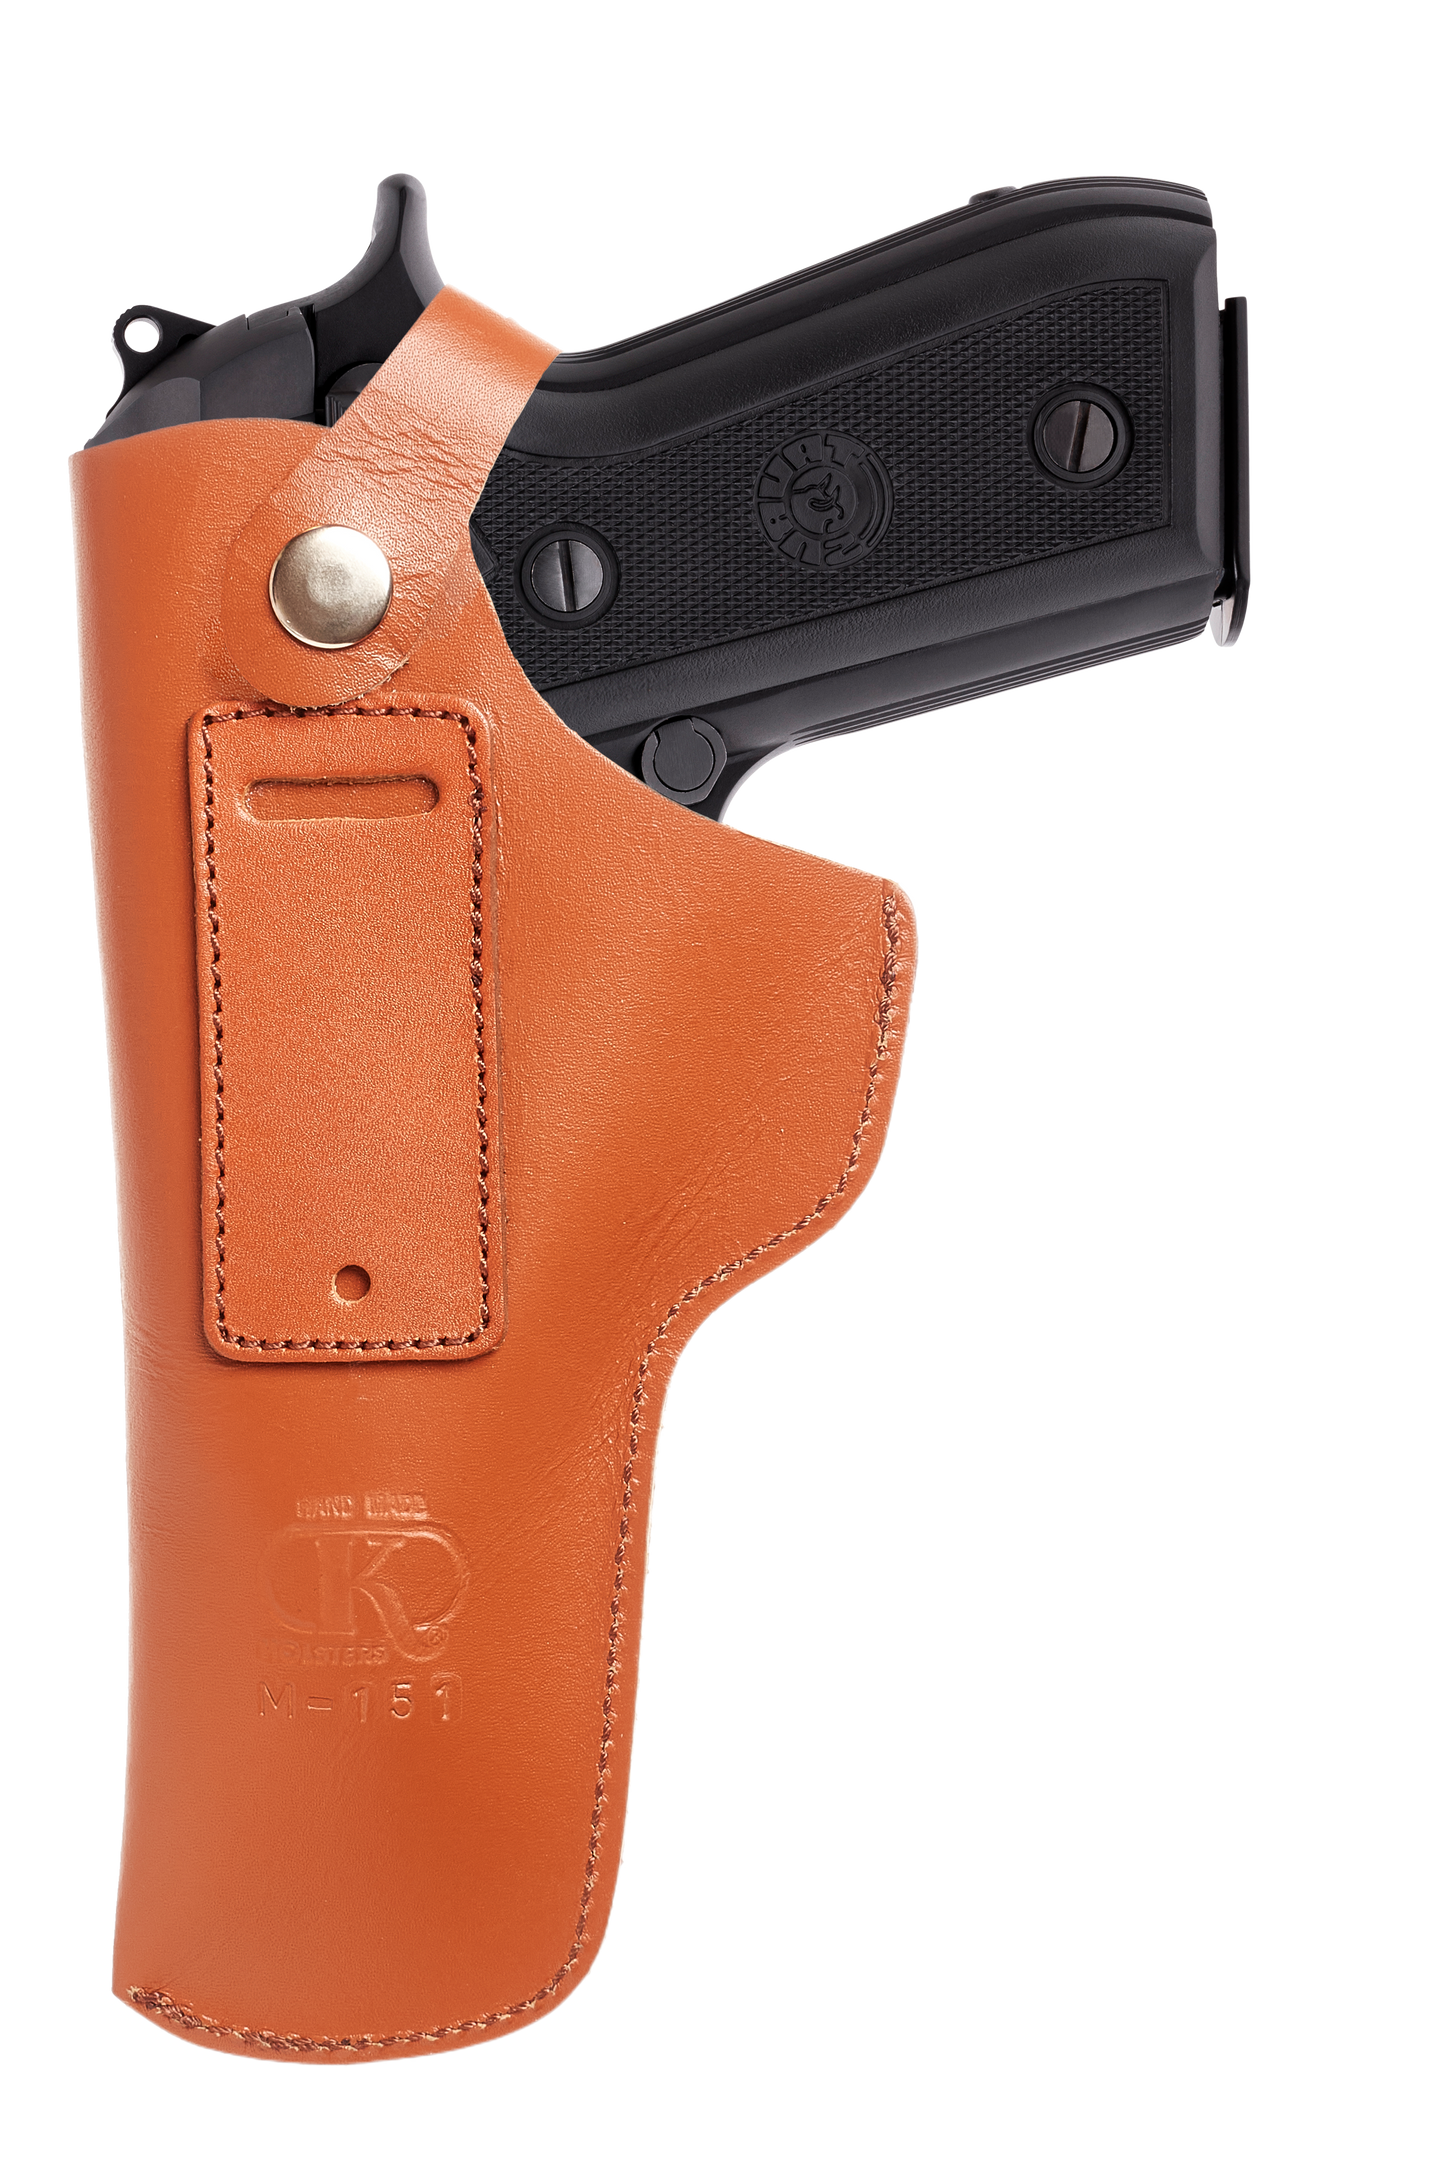 Koltster Beretta 92F Holster, IWB Leather Holster for Beretta 92 92S 92FS | S&W M&P Shield and Similar Sized Handguns, Concealed Carry Genuine Leather Holster with Belt Clip, Black Handmade (KM151)